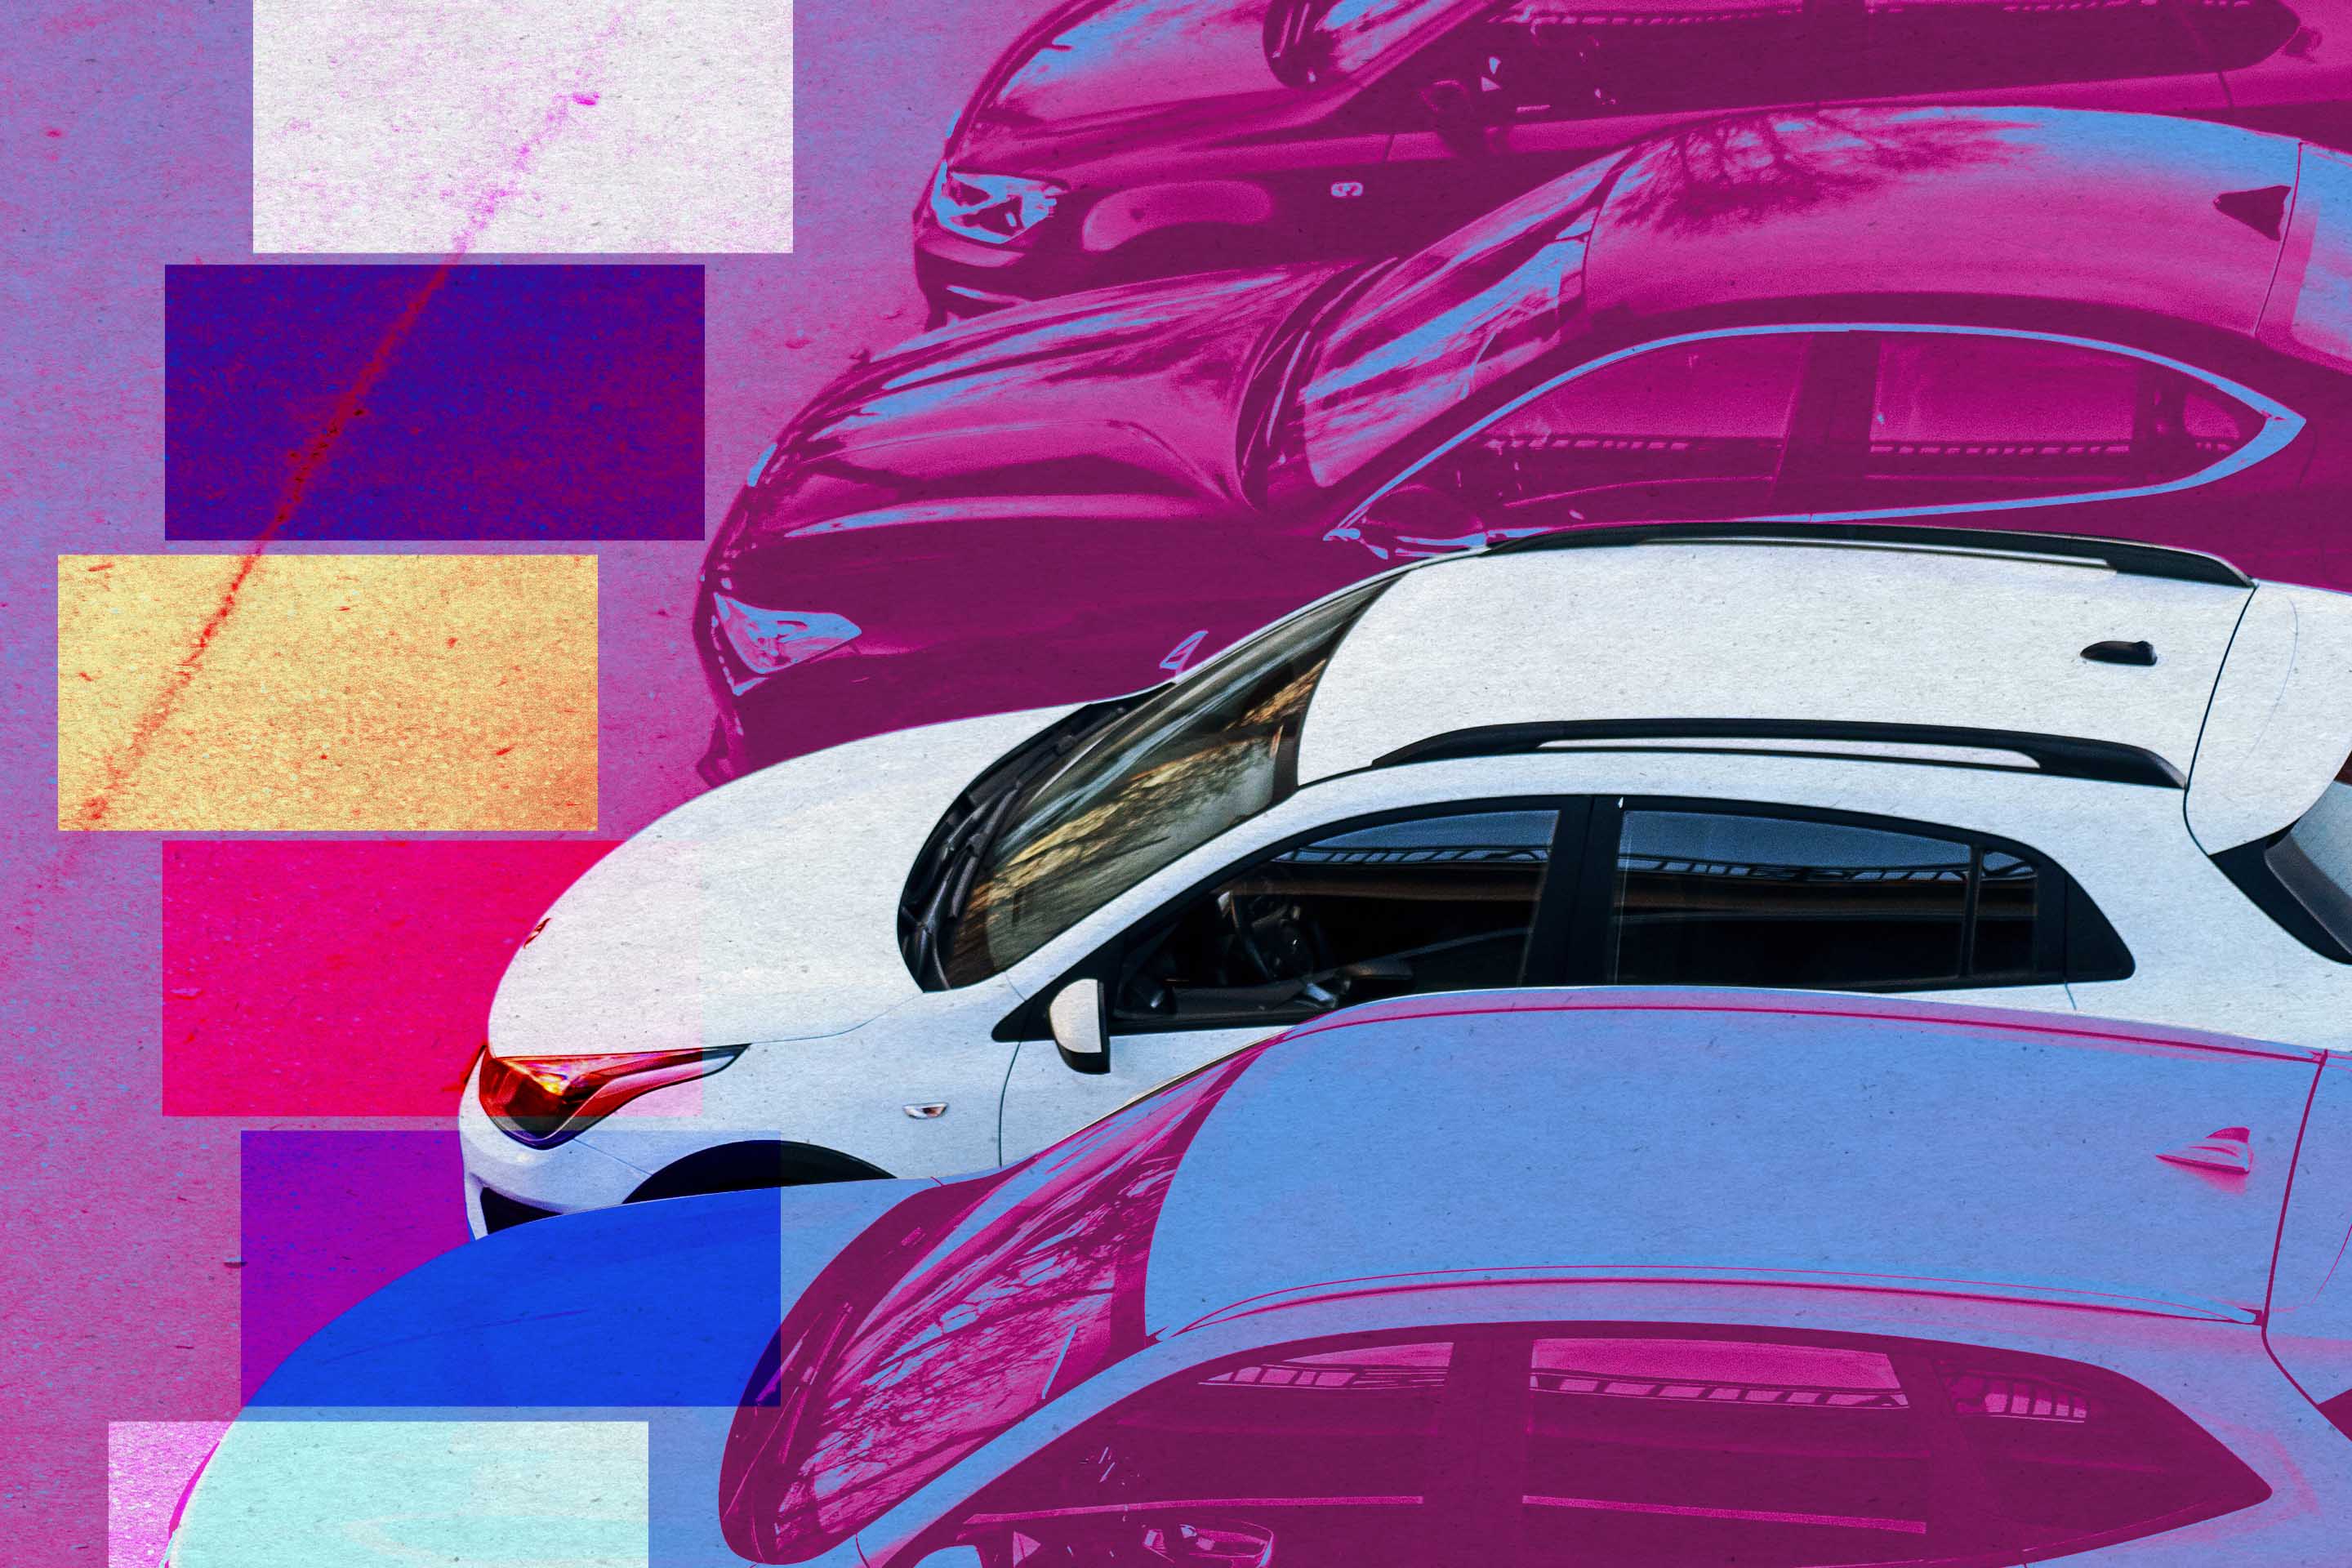 The best and worst car colors for resale value